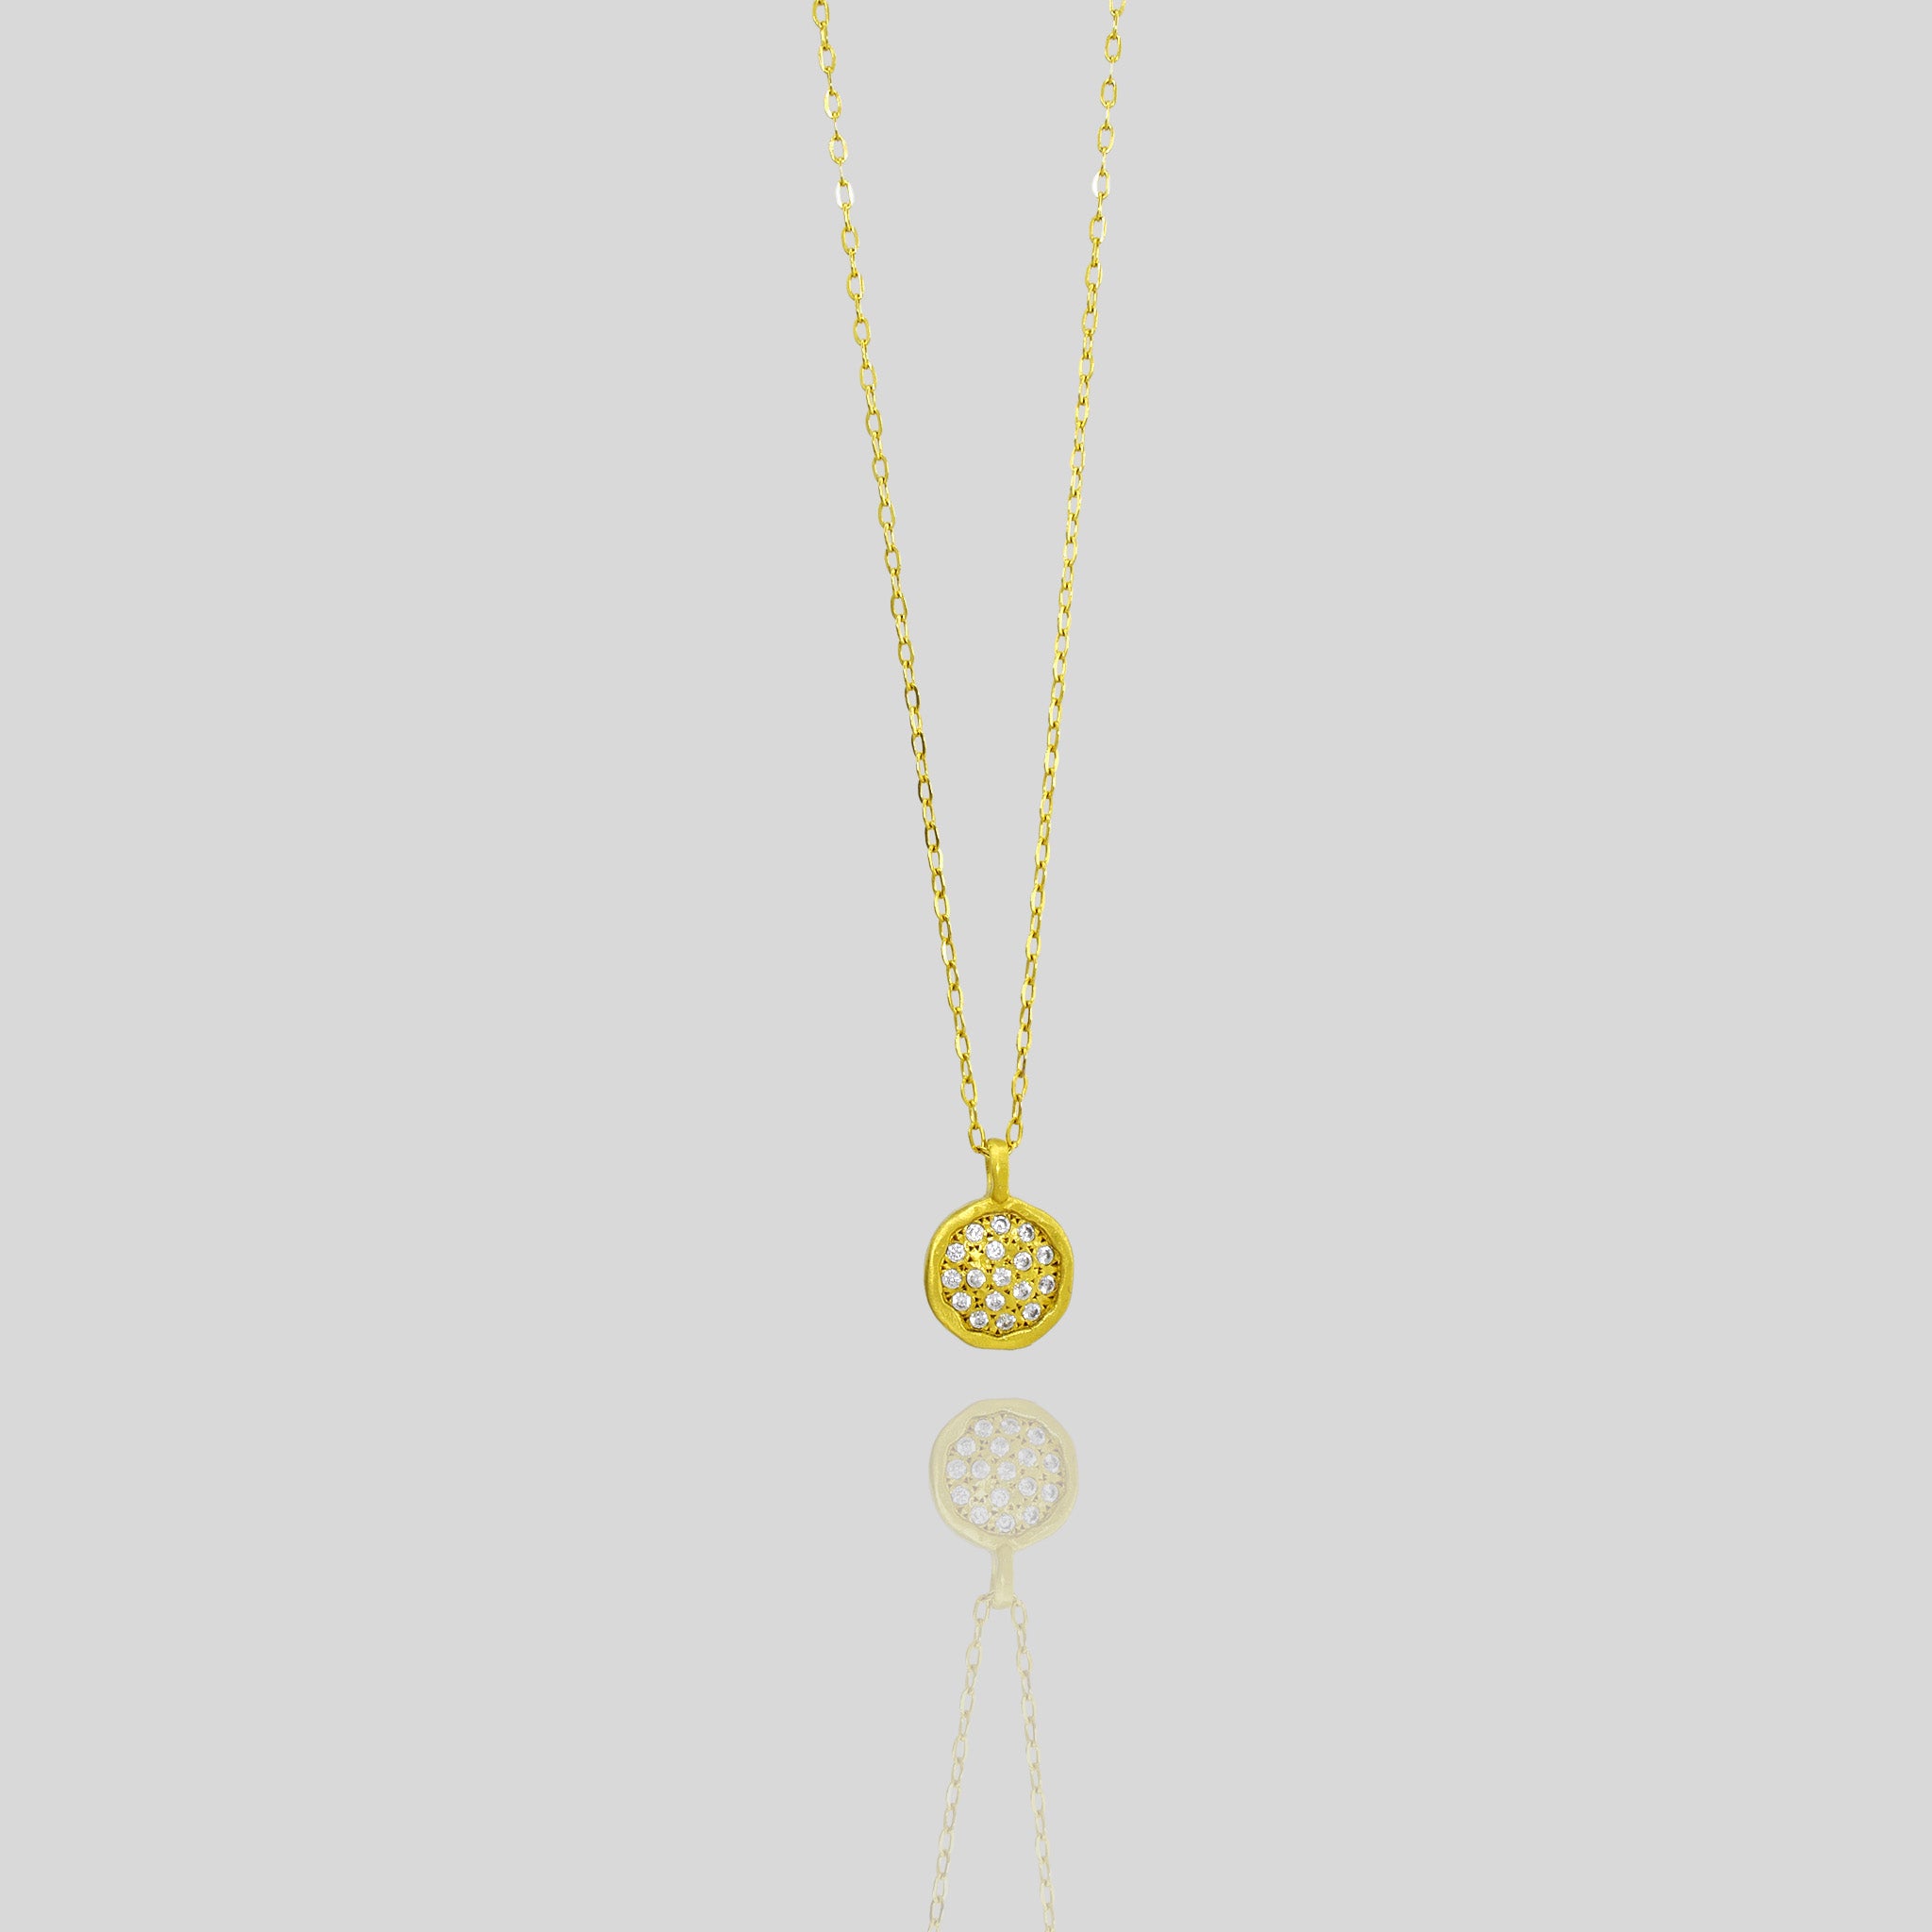 Starlit gold pendant, expertly handcrafted from Yellow Gold with a small gold plate peppered with scattered tiny Diamonds, invoking the beauty of a starry night sky.